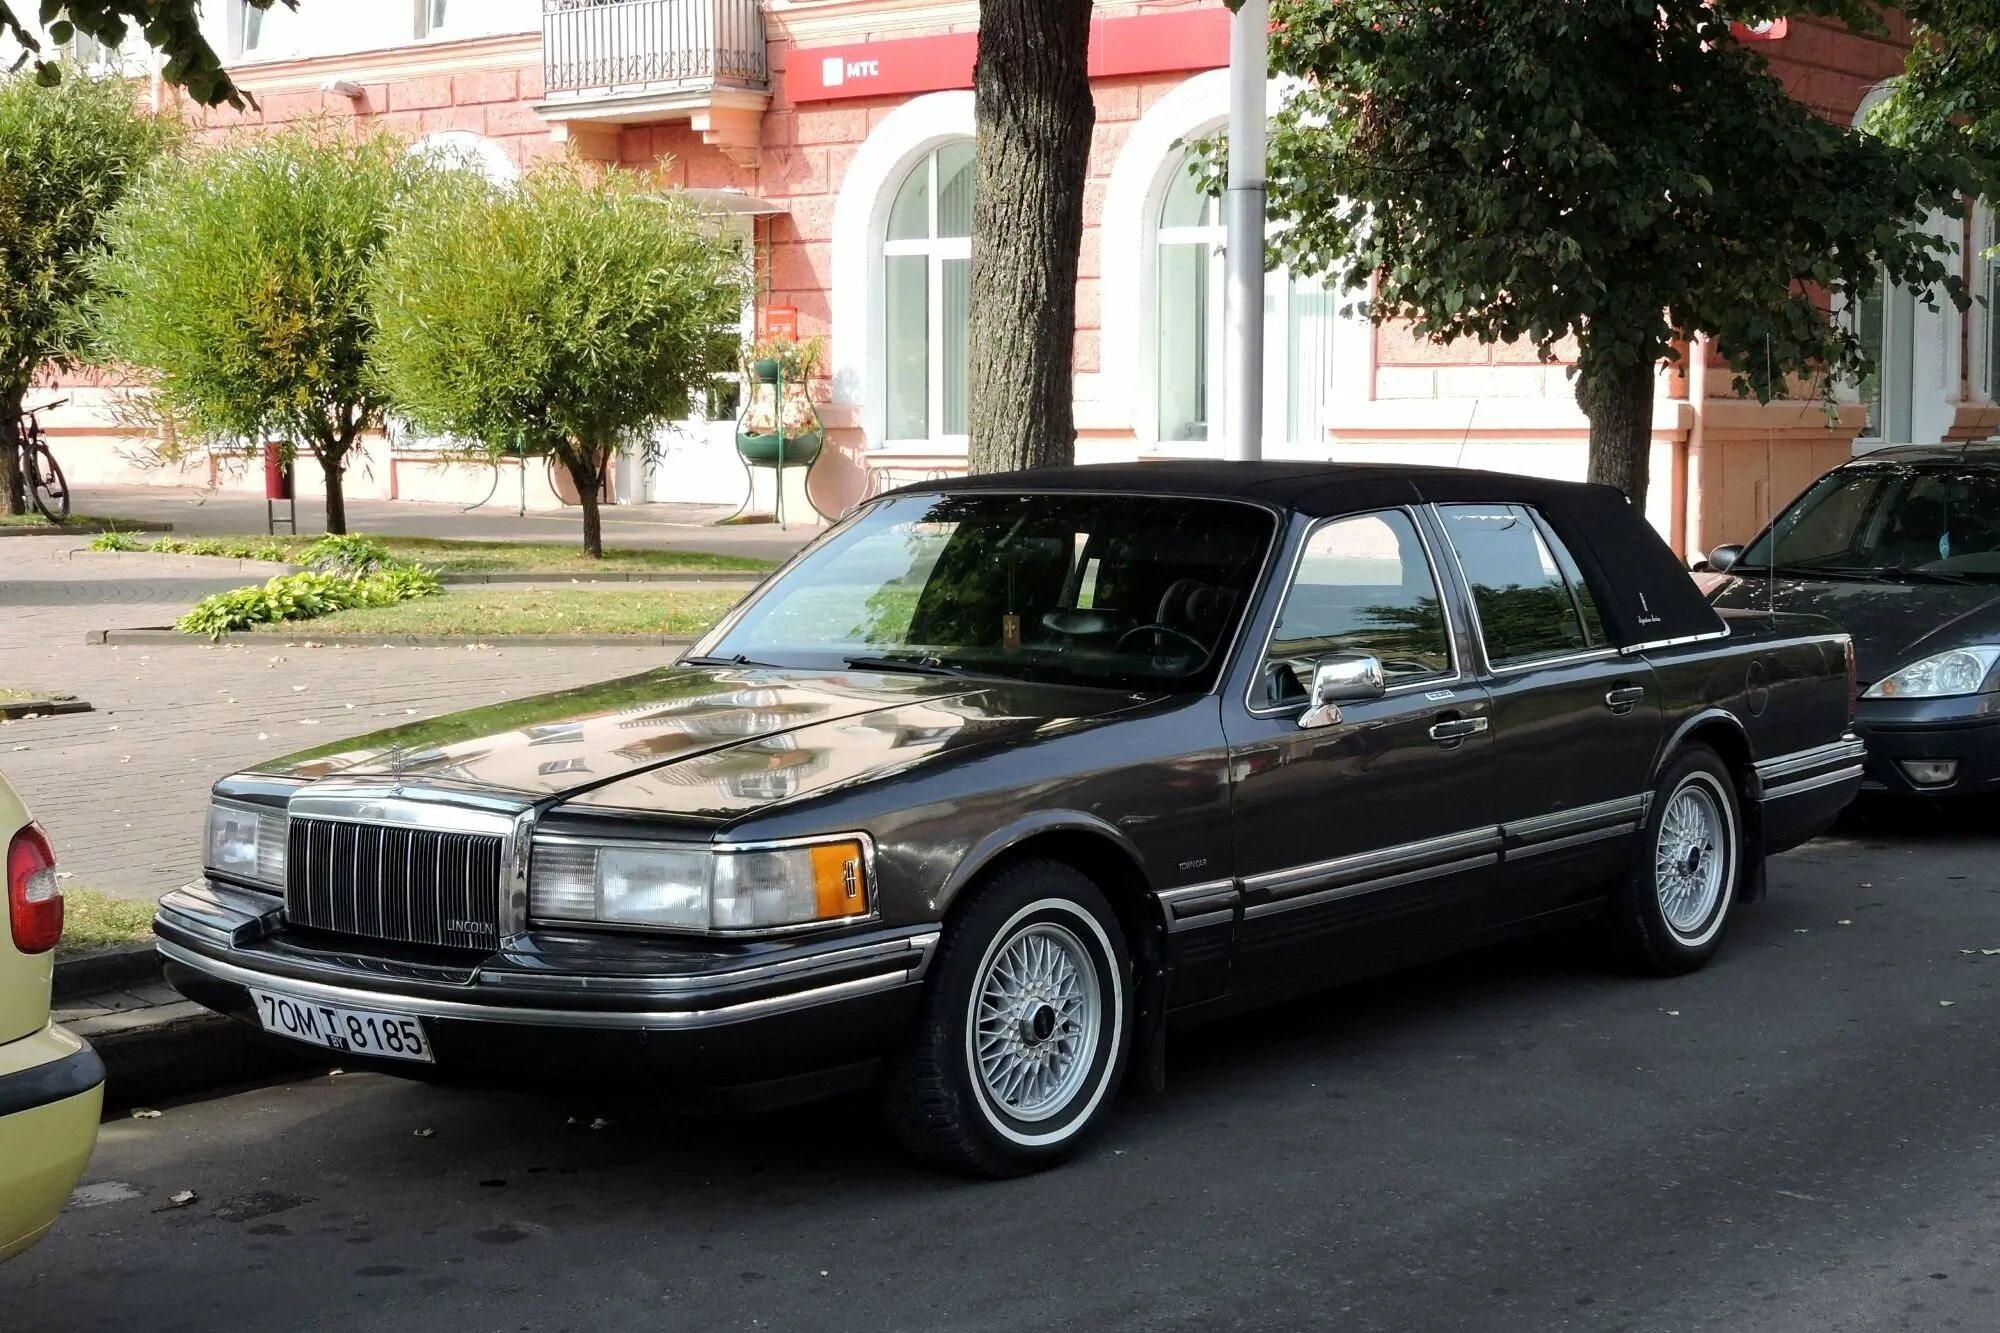 Таун кар 2. Lincoln Town car 1993. Lincoln Town car 2. Lincoln Town car 1997. Lincoln Town car 1992.